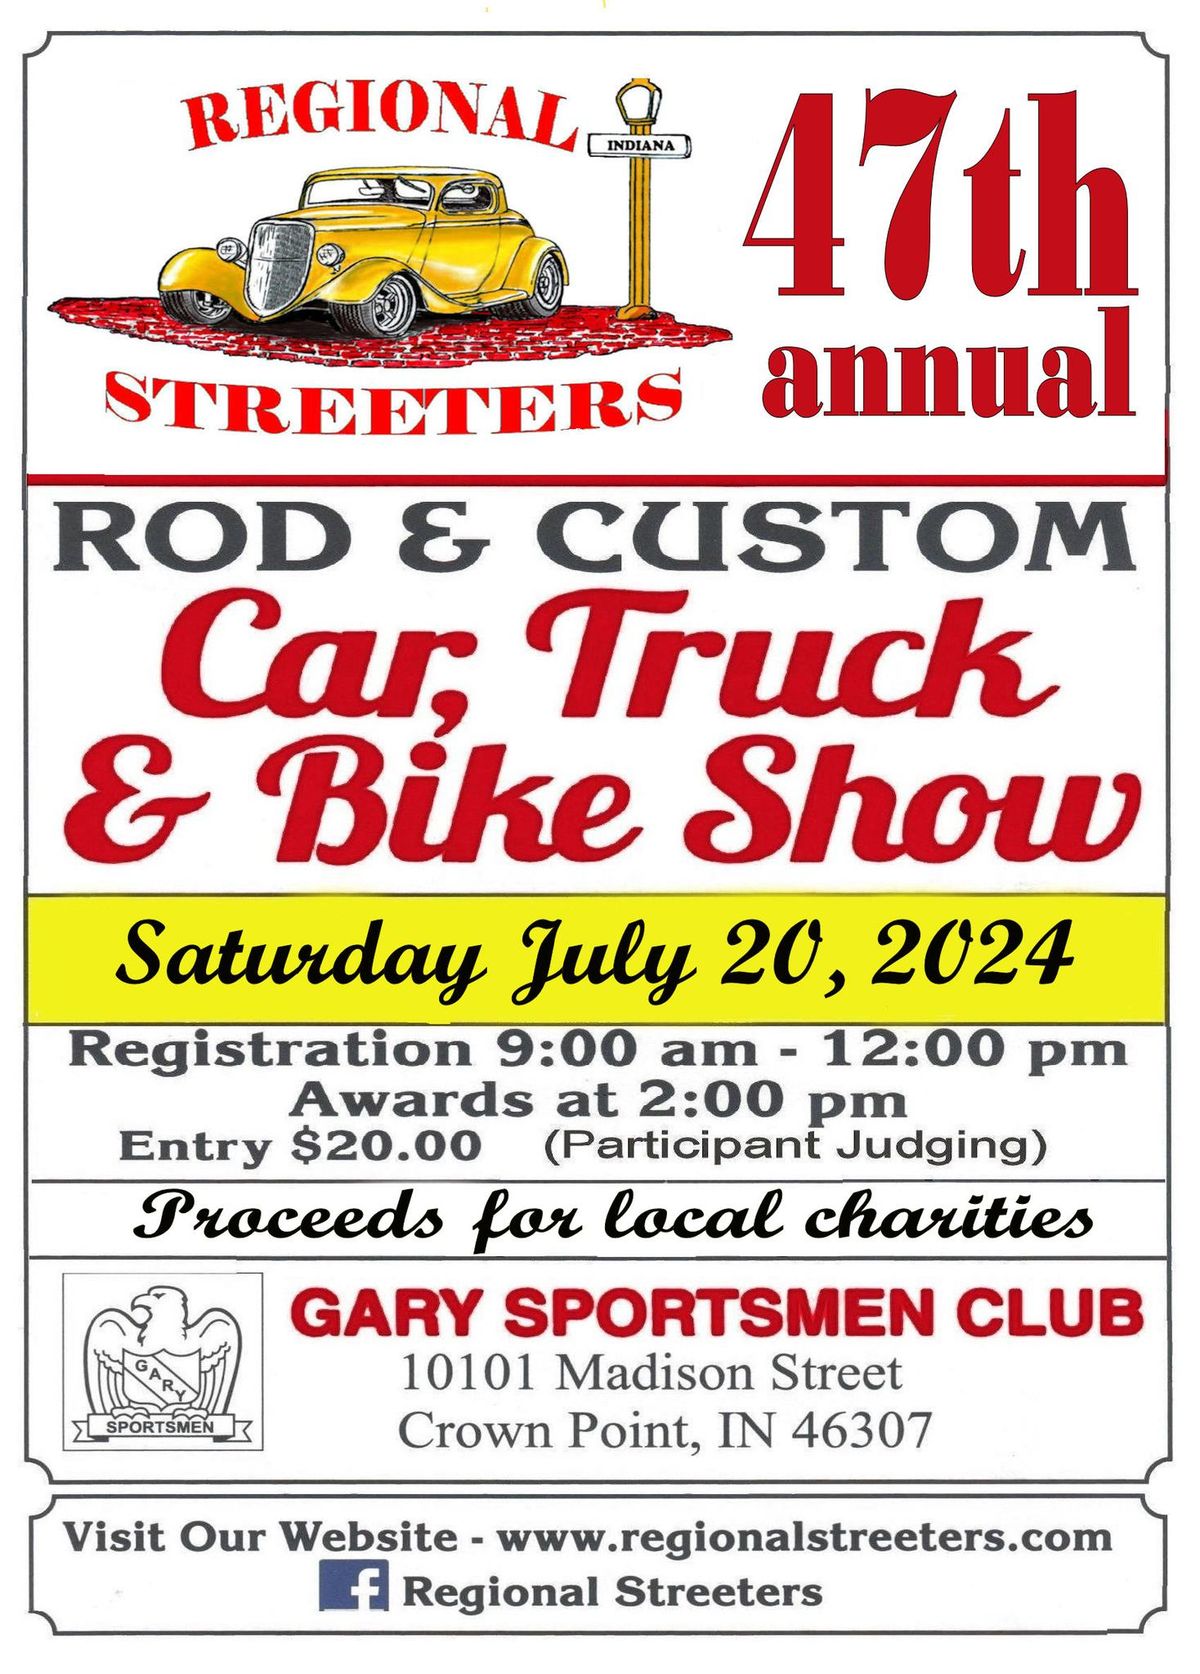 47th Regional Streeter car show. Come out and enjoy some time with us.